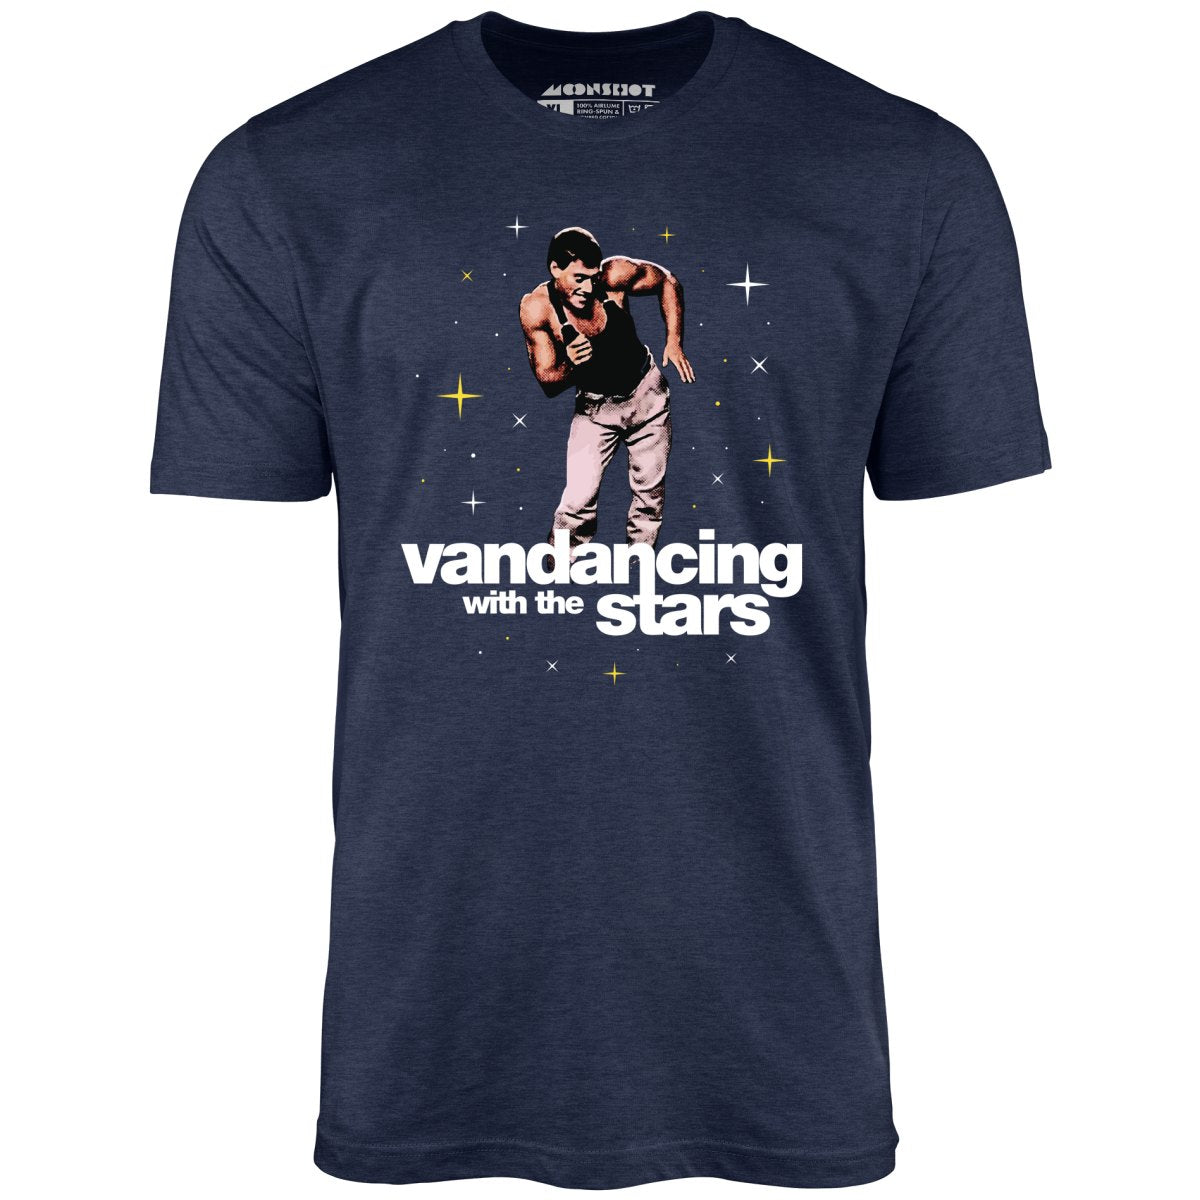 Vandancing With The Stars - Unisex T-Shirt